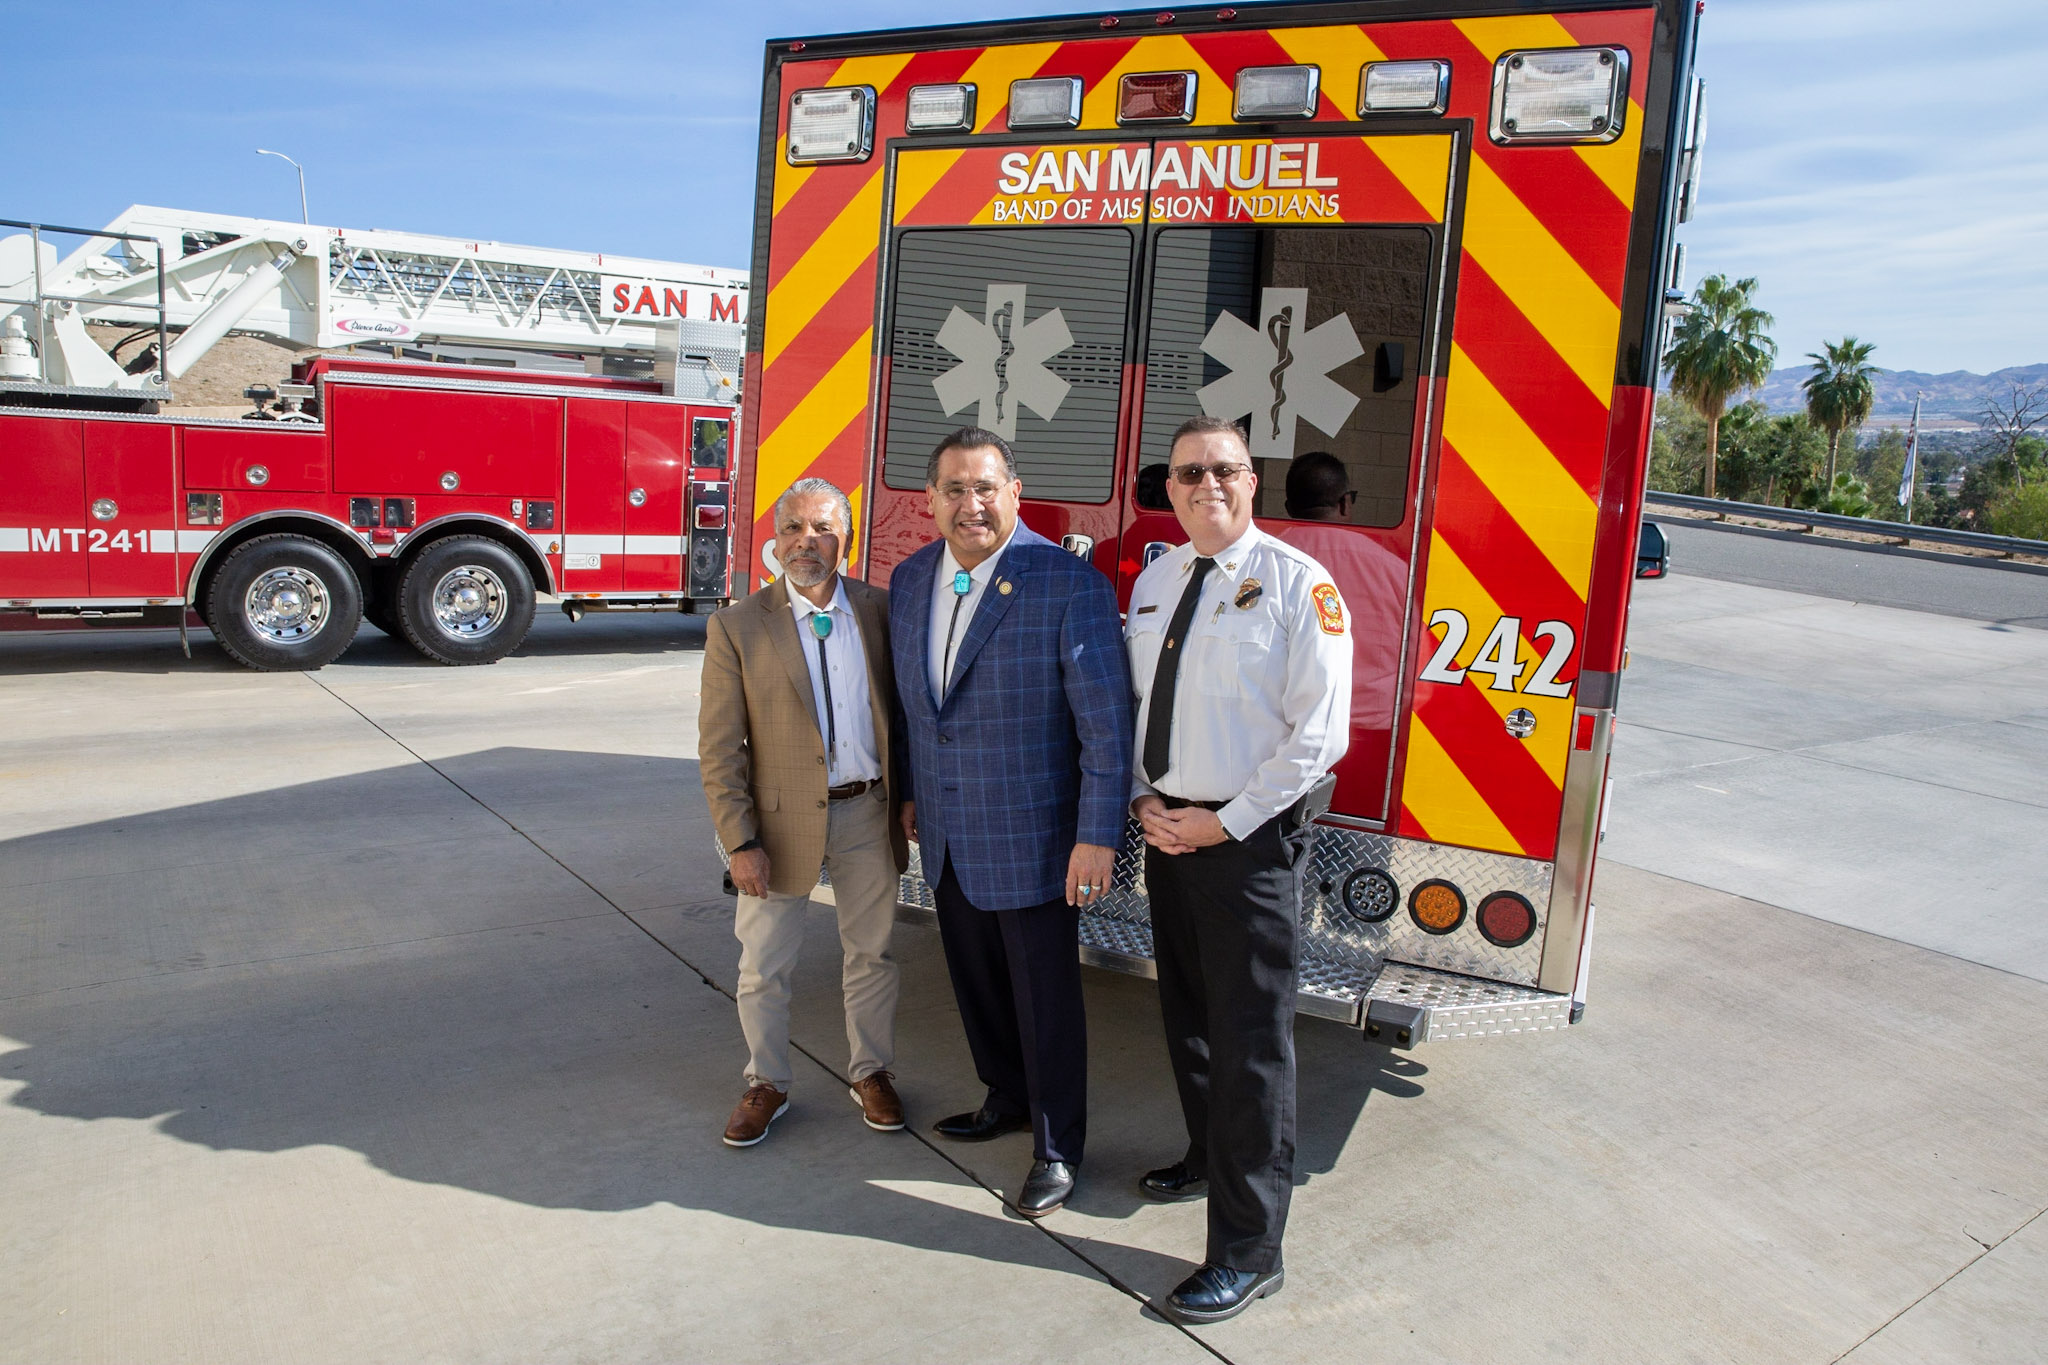 Pictured SM Chairman Ken Ramirez, CA Assemblymember James Ramos and SM Fire Chief Mike Smith